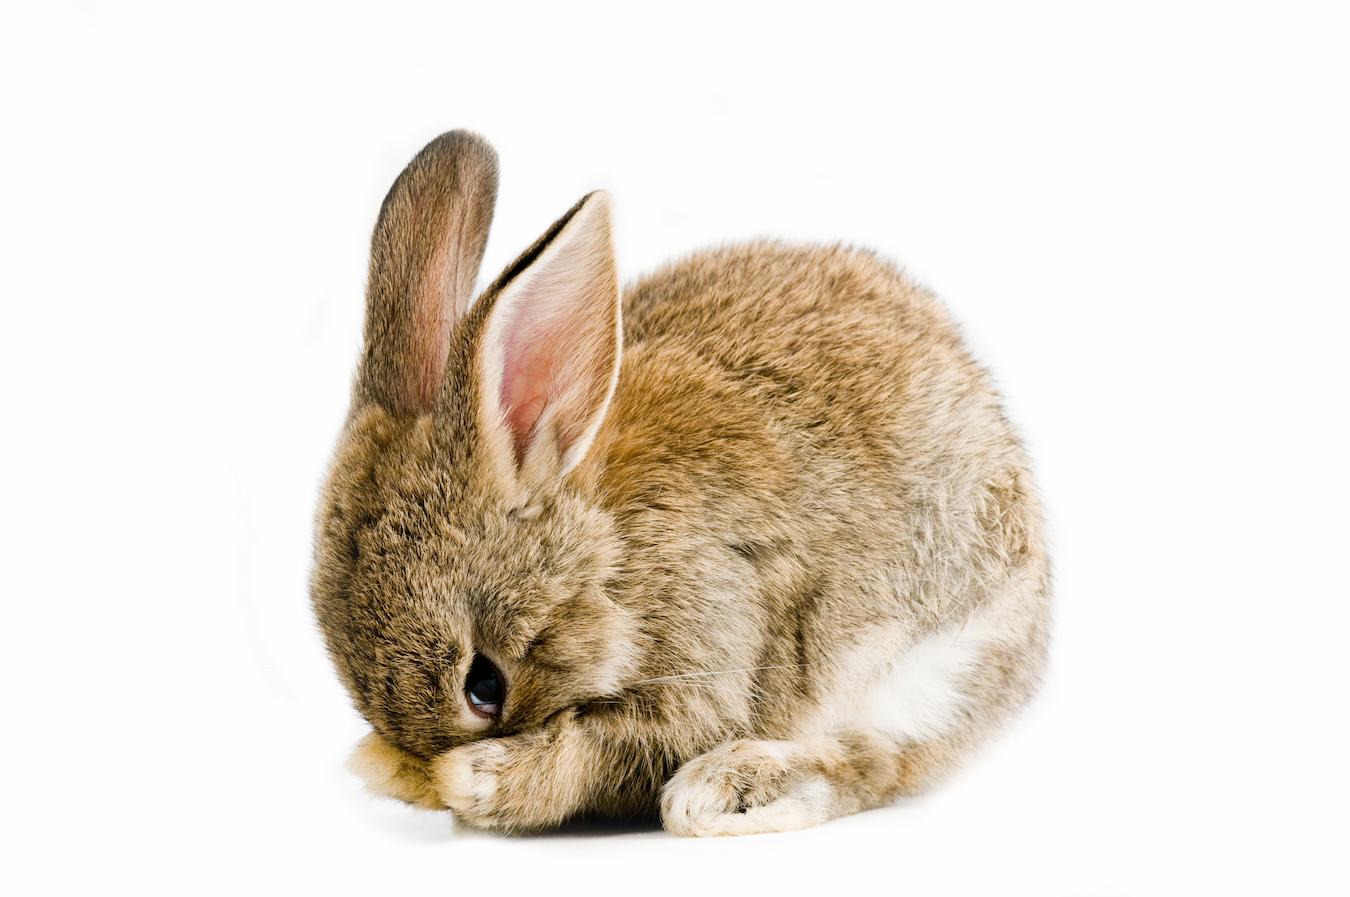 A cruelty free brand sells products that are not tested on animals